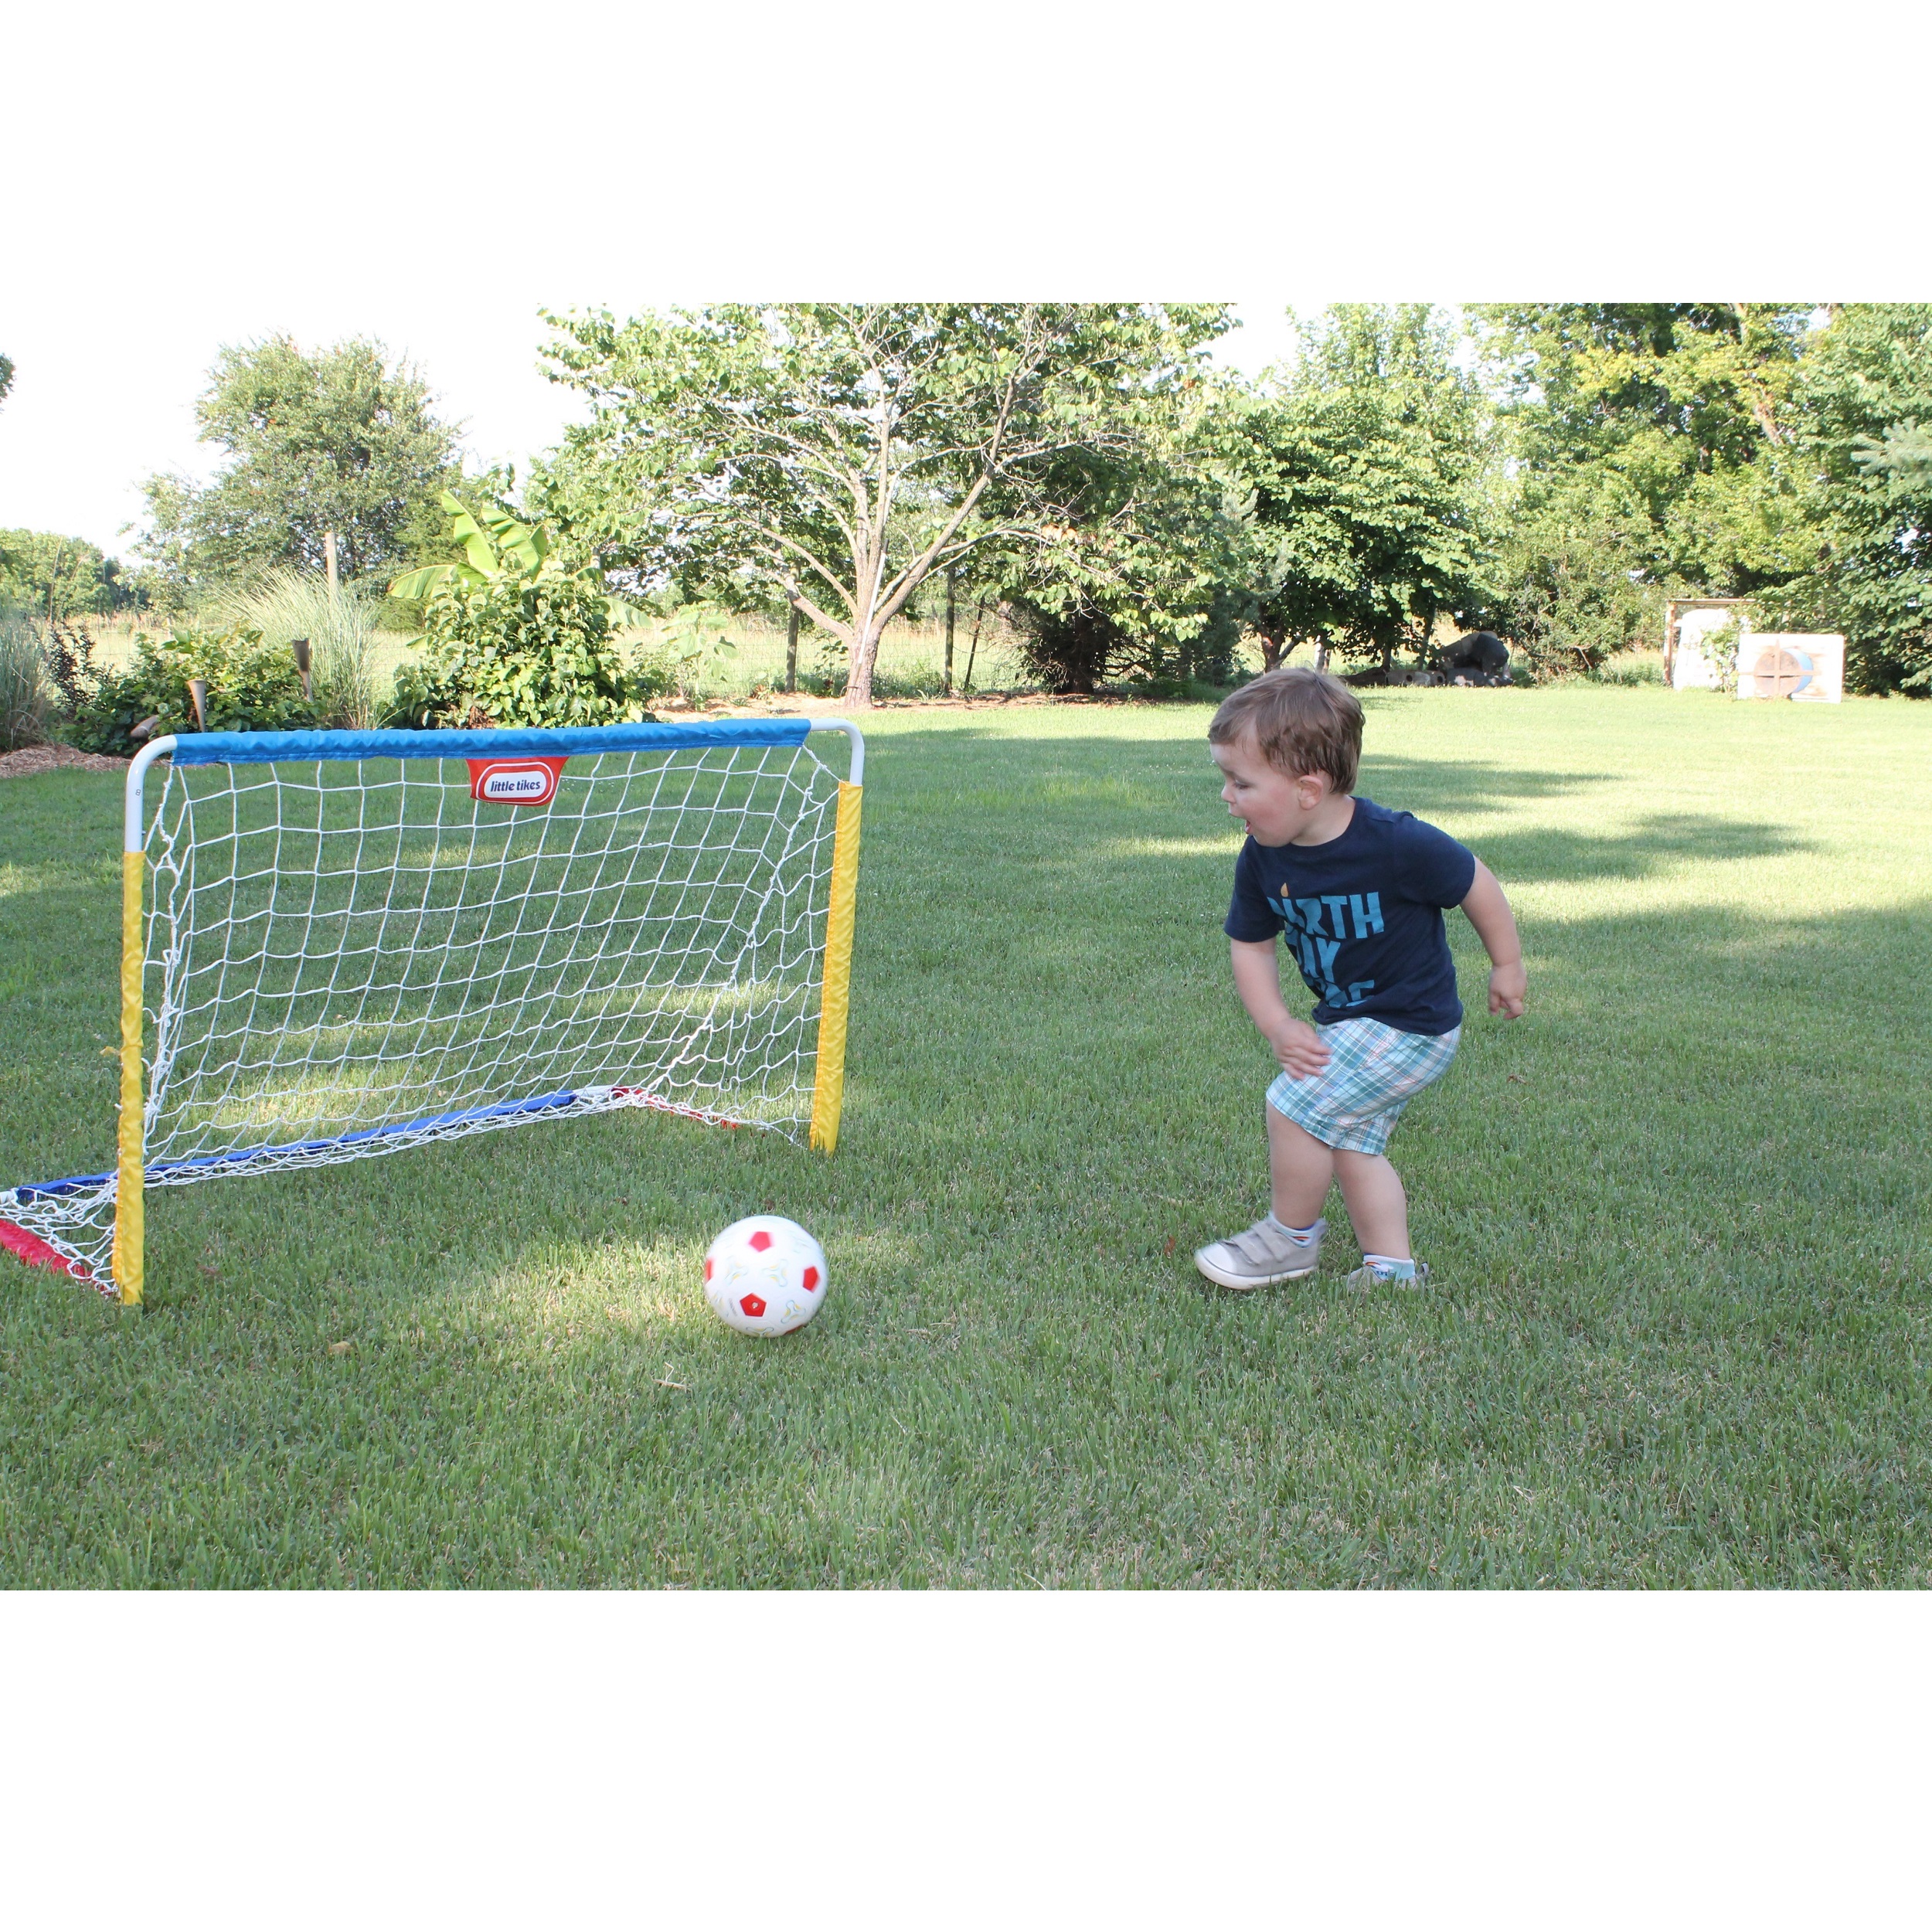 Little Tikes Easy Score Toy Soccer Set with Ball, Goal, and Pump- Toy Sports Play Set for Toddlers Kids Girls Boys Ages 3 4 5+ Year Old - image 3 of 5